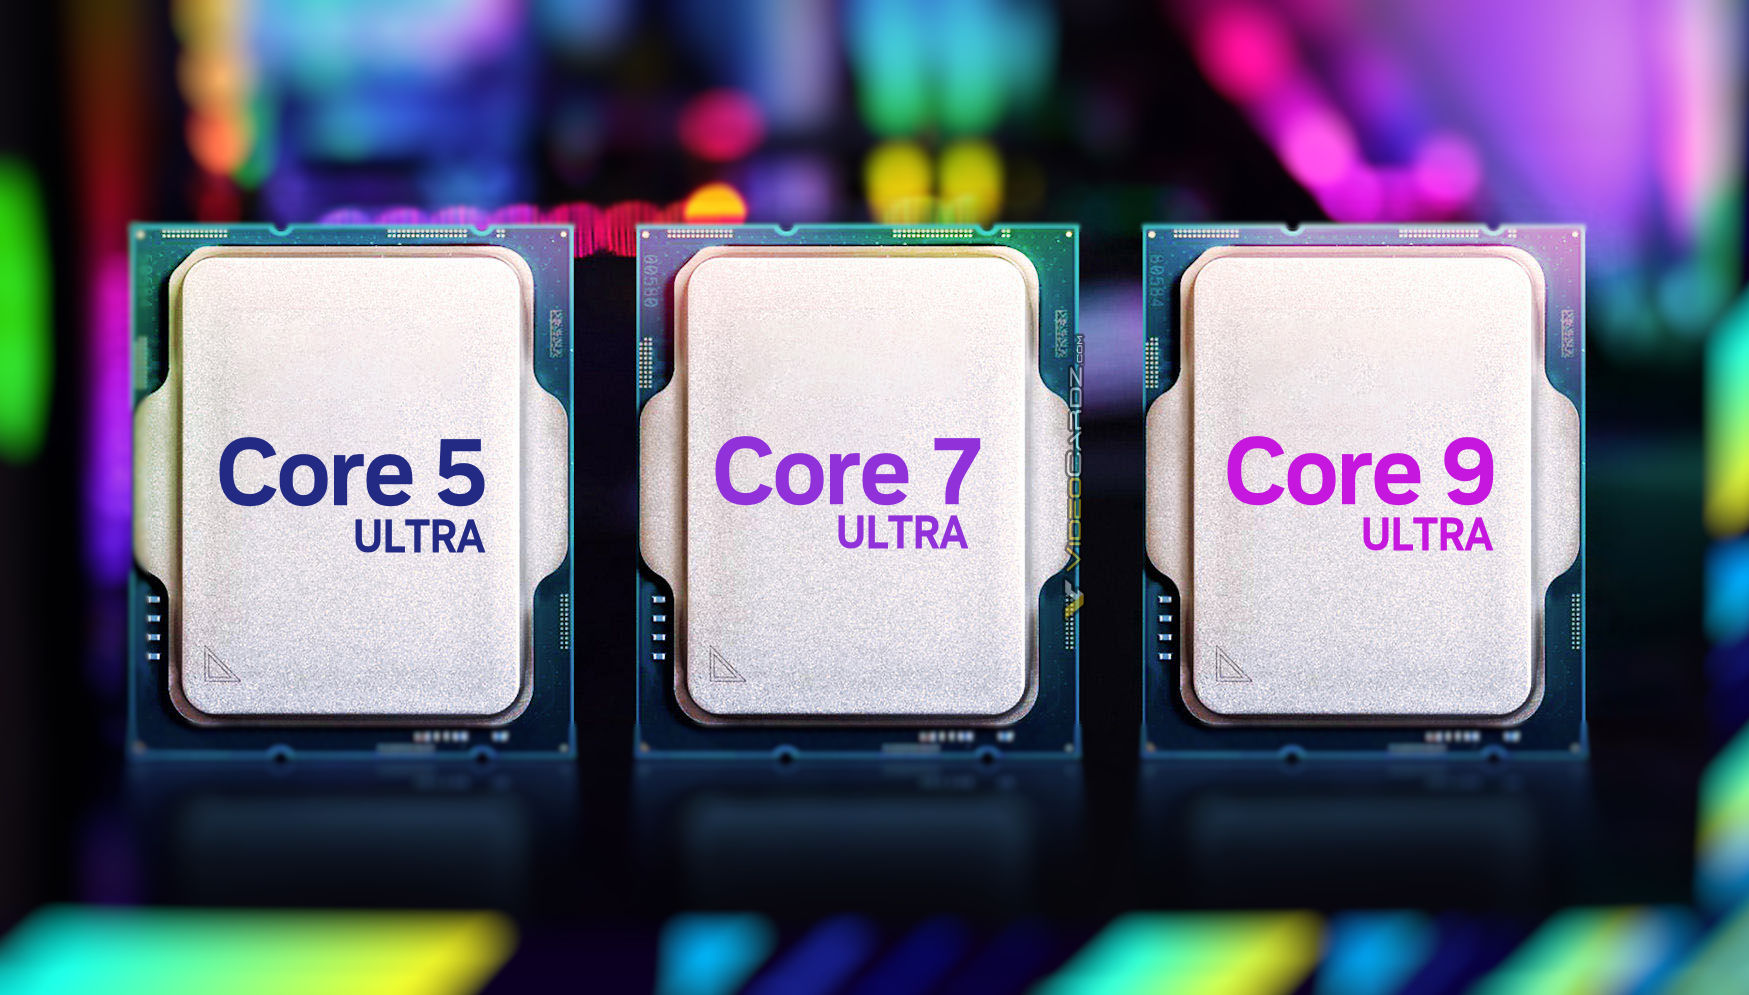 Intel confirms changes to client product naming schema, Core i5 could  become Core (Ultra) 5 